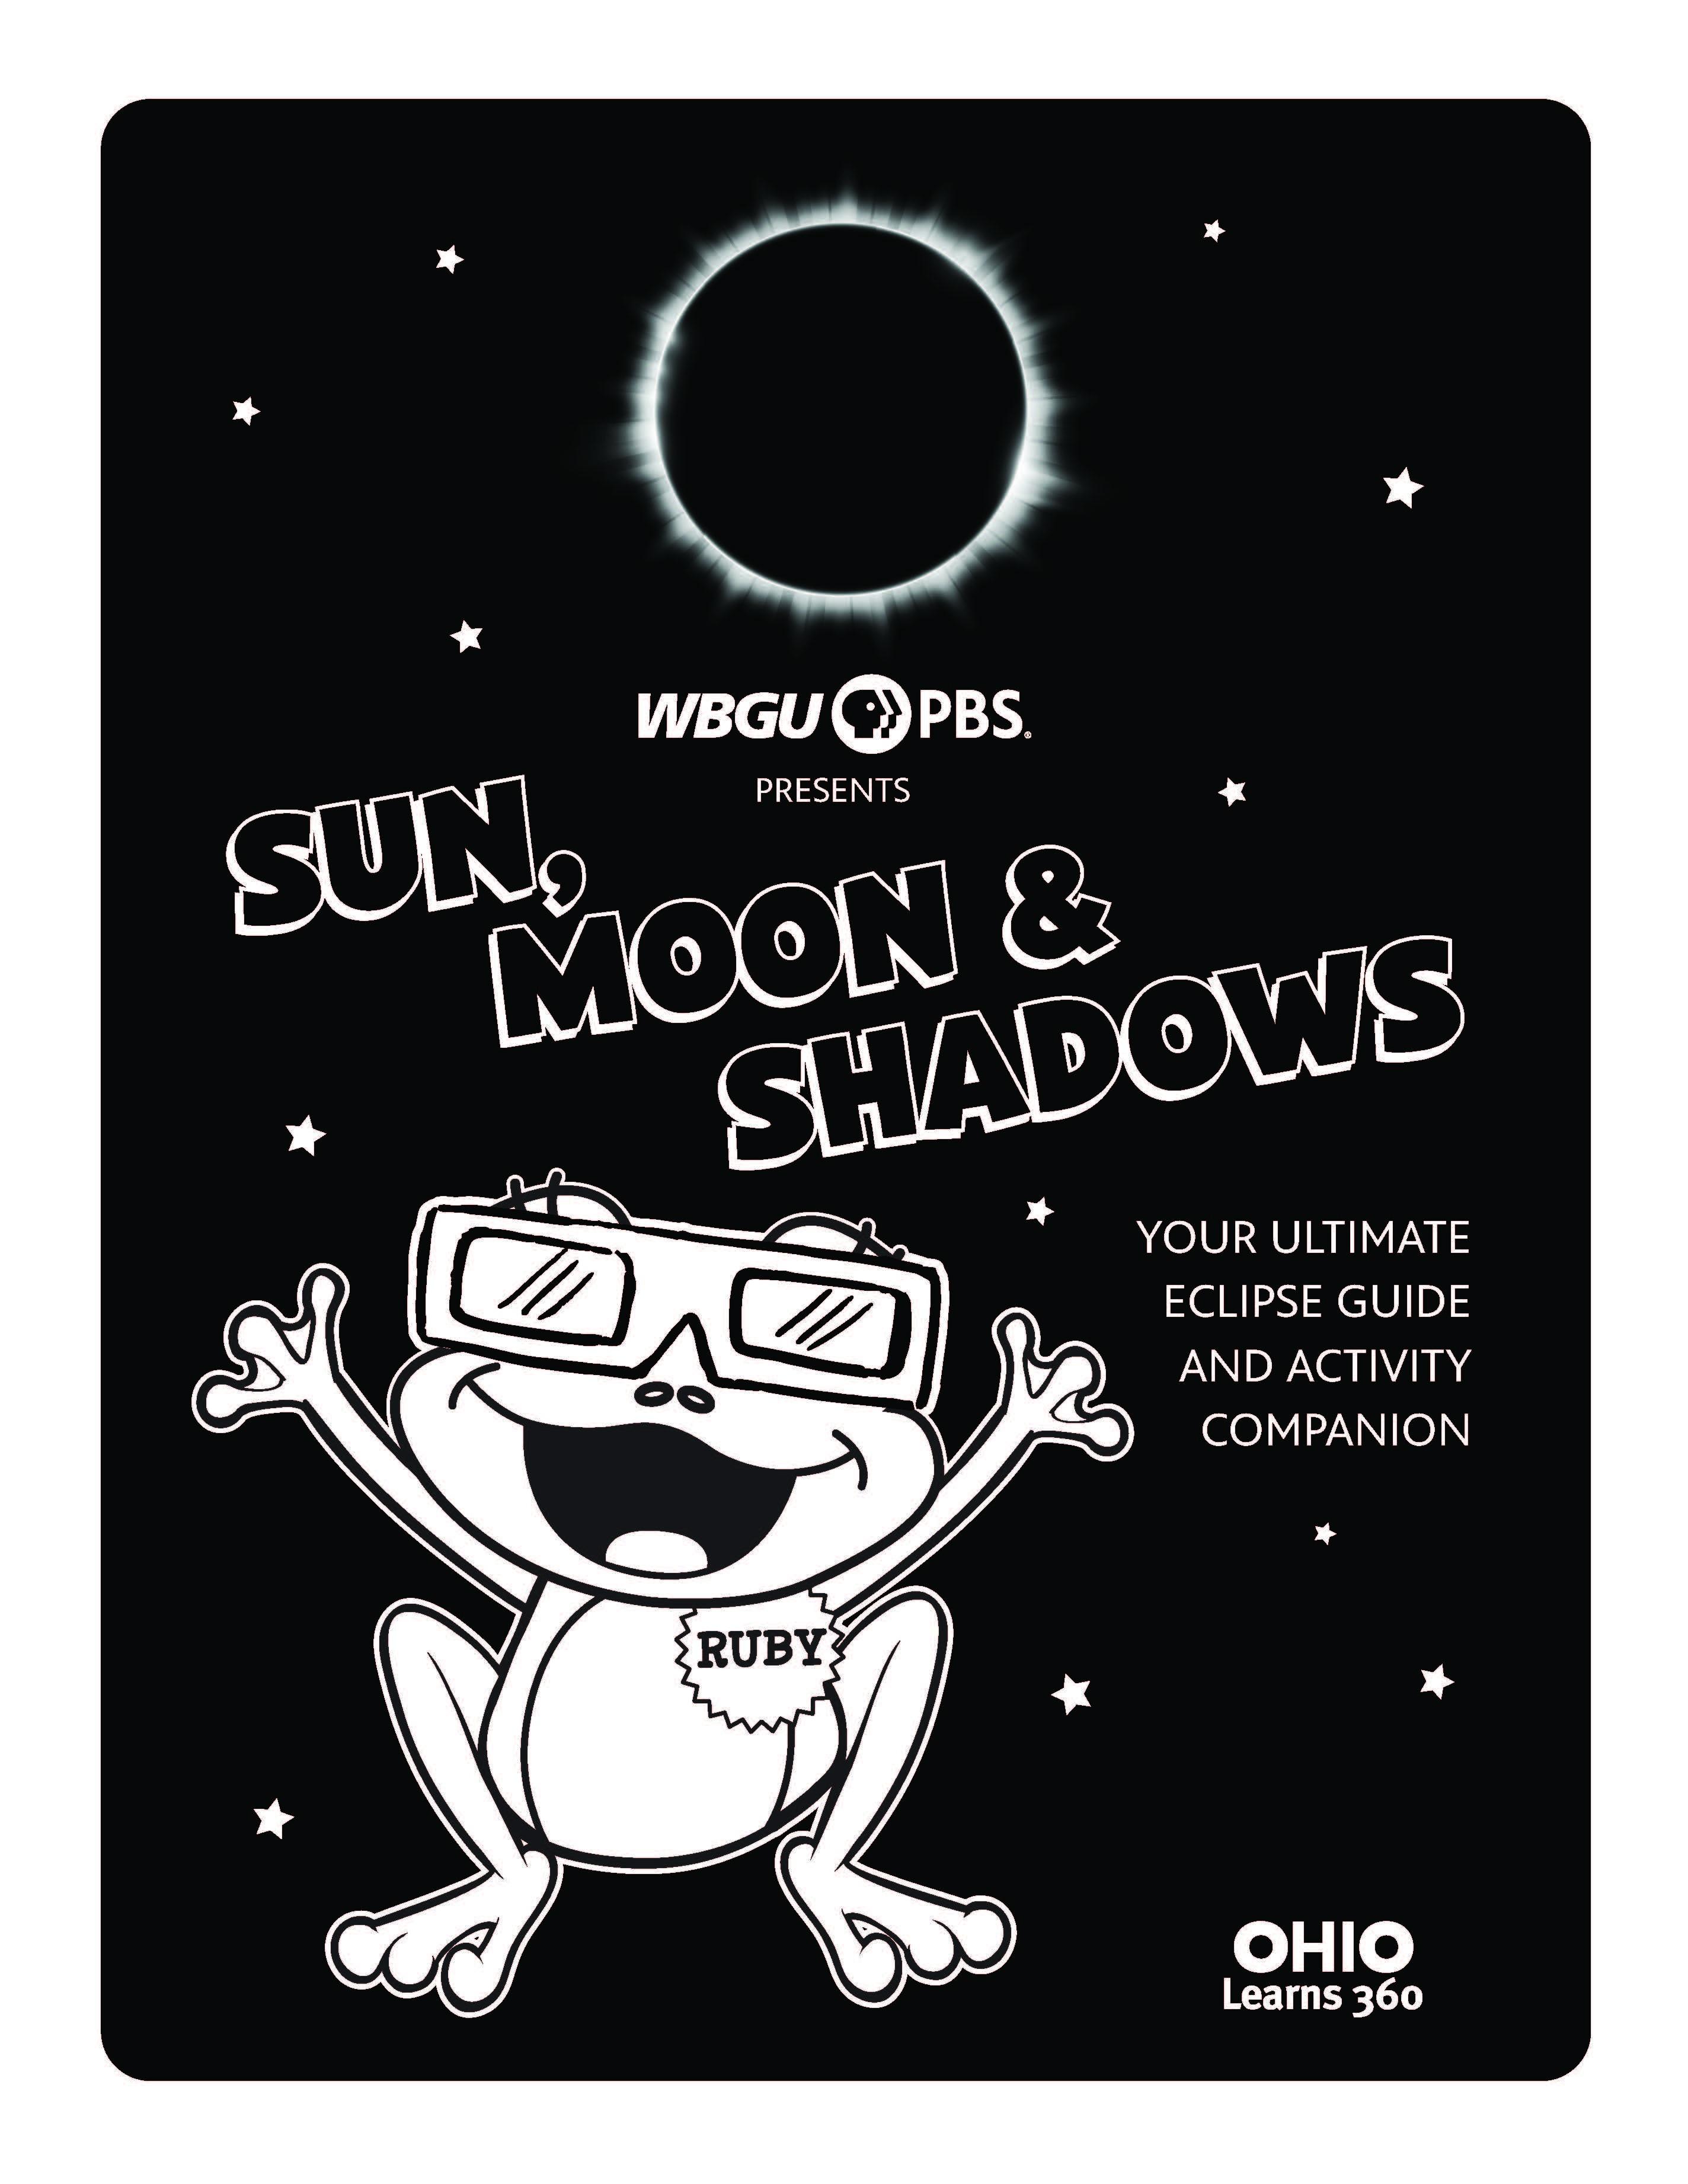 Cover page for an eclipse guide and activity book that can be touched or clicked on to download the guide. The background is black with an illustrations and lettering in white. The lettering says, WBGU-PBS presents Sun, Moon & Shadows: Your Ultimate Eclipse Guide and Activity Companion. Illustrations include a solar eclipse and stars, Ruby the Red-Eyed Tree Frog smiling while wearing eclipse glasses and an Ohio Learns 360 logo at the bottom of the page.